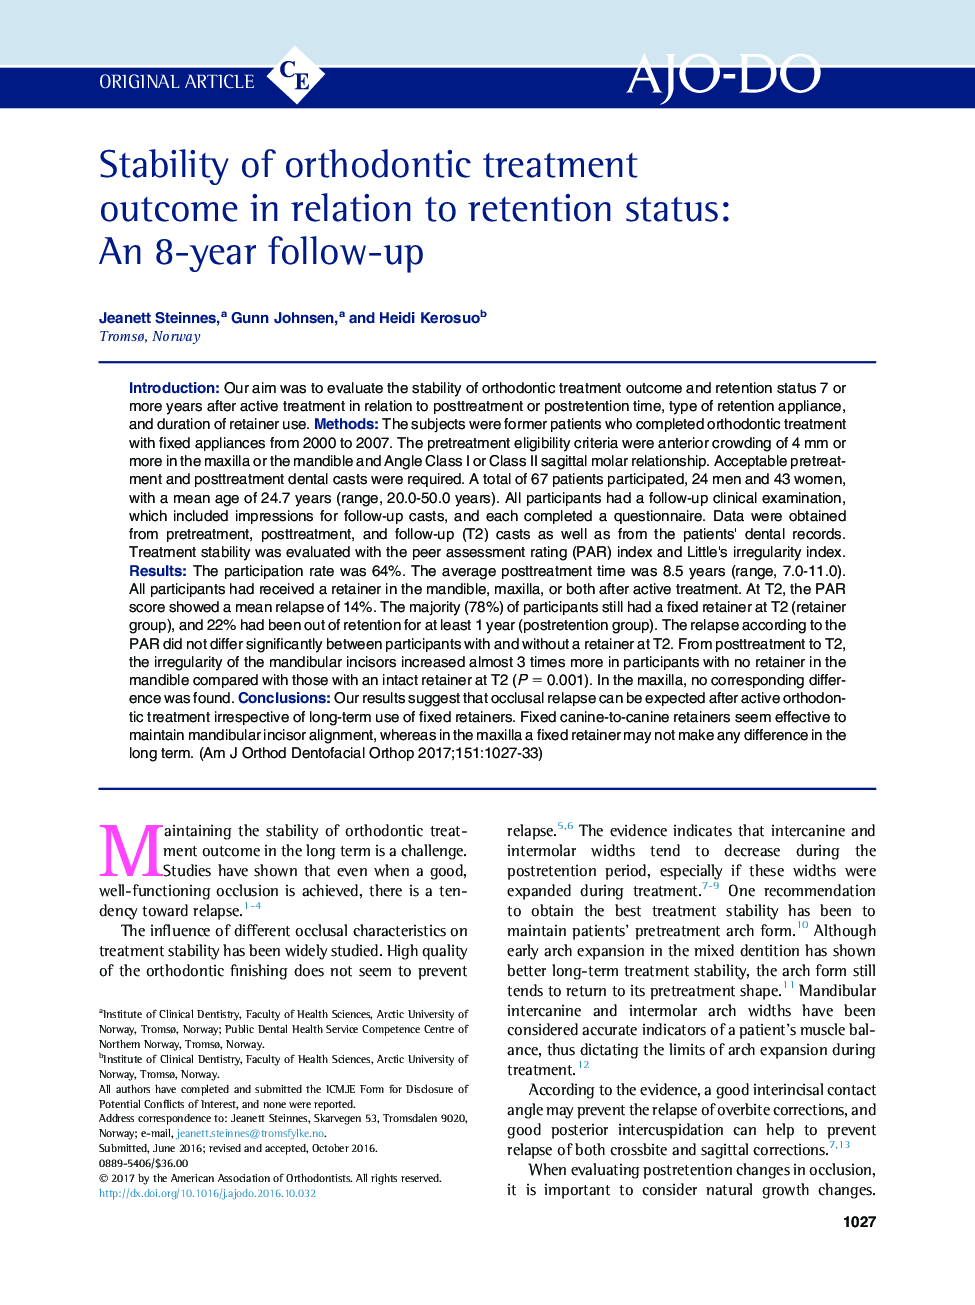 Stability of orthodontic treatment outcome in relation to retention status: An 8-year follow-up